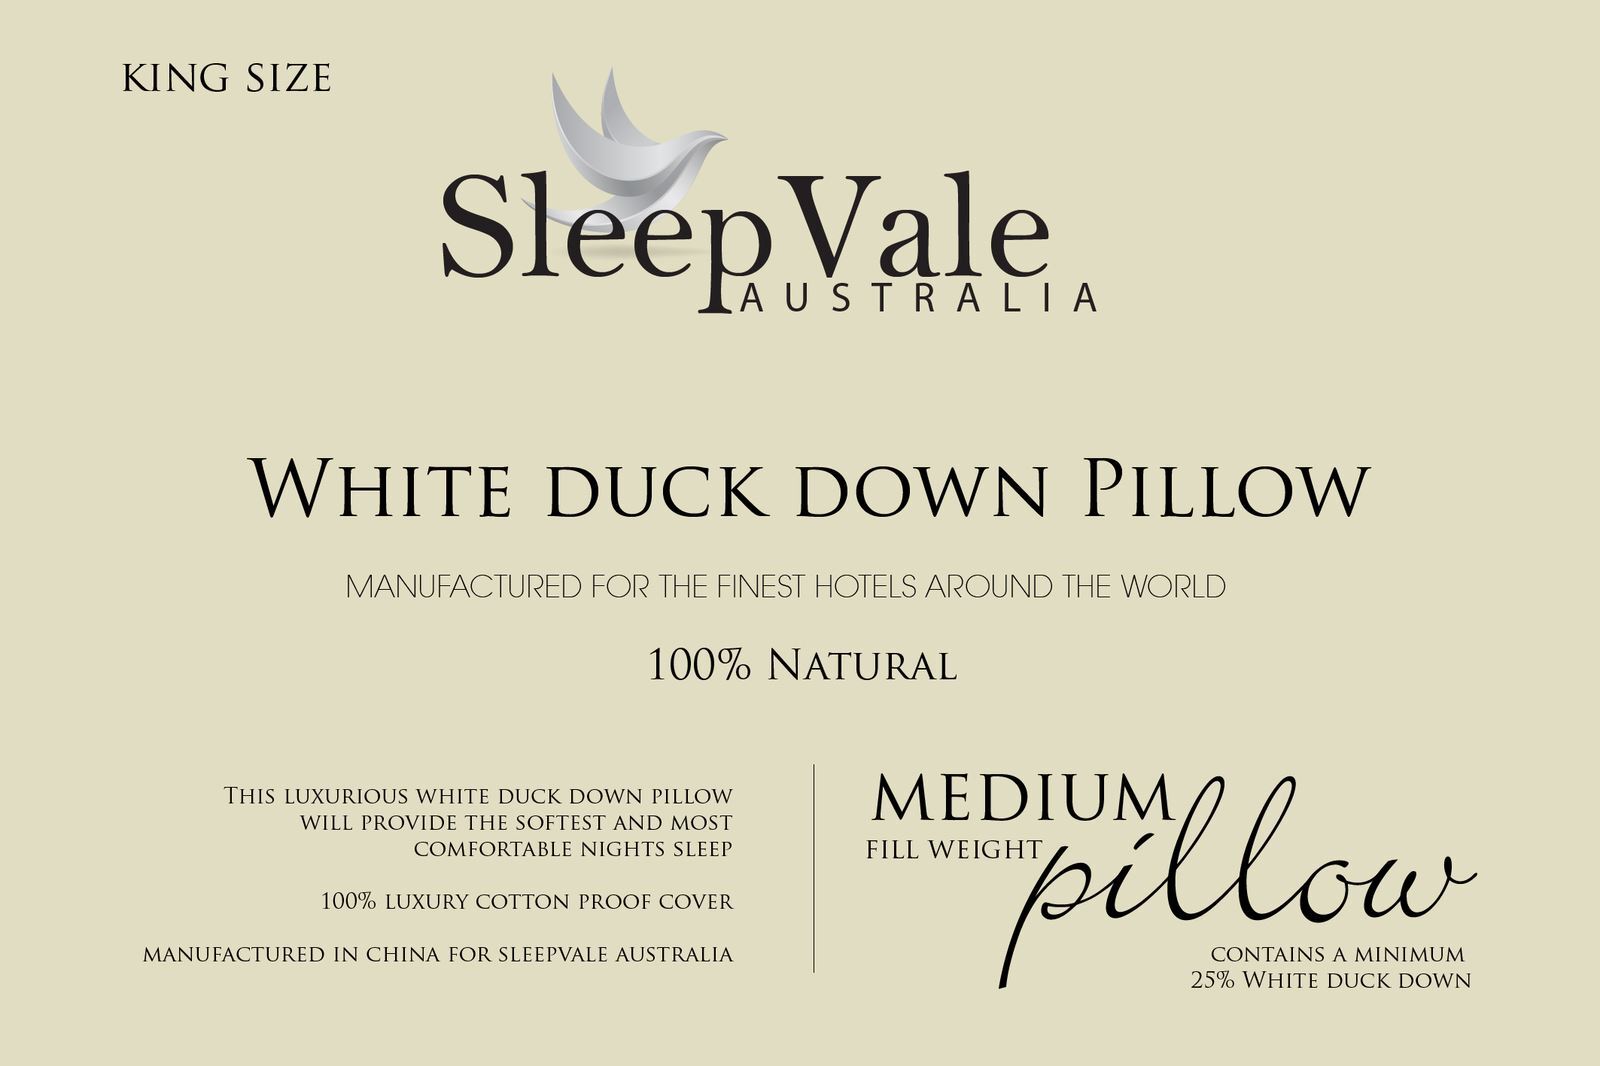 Duck Down - King Size PILLOW